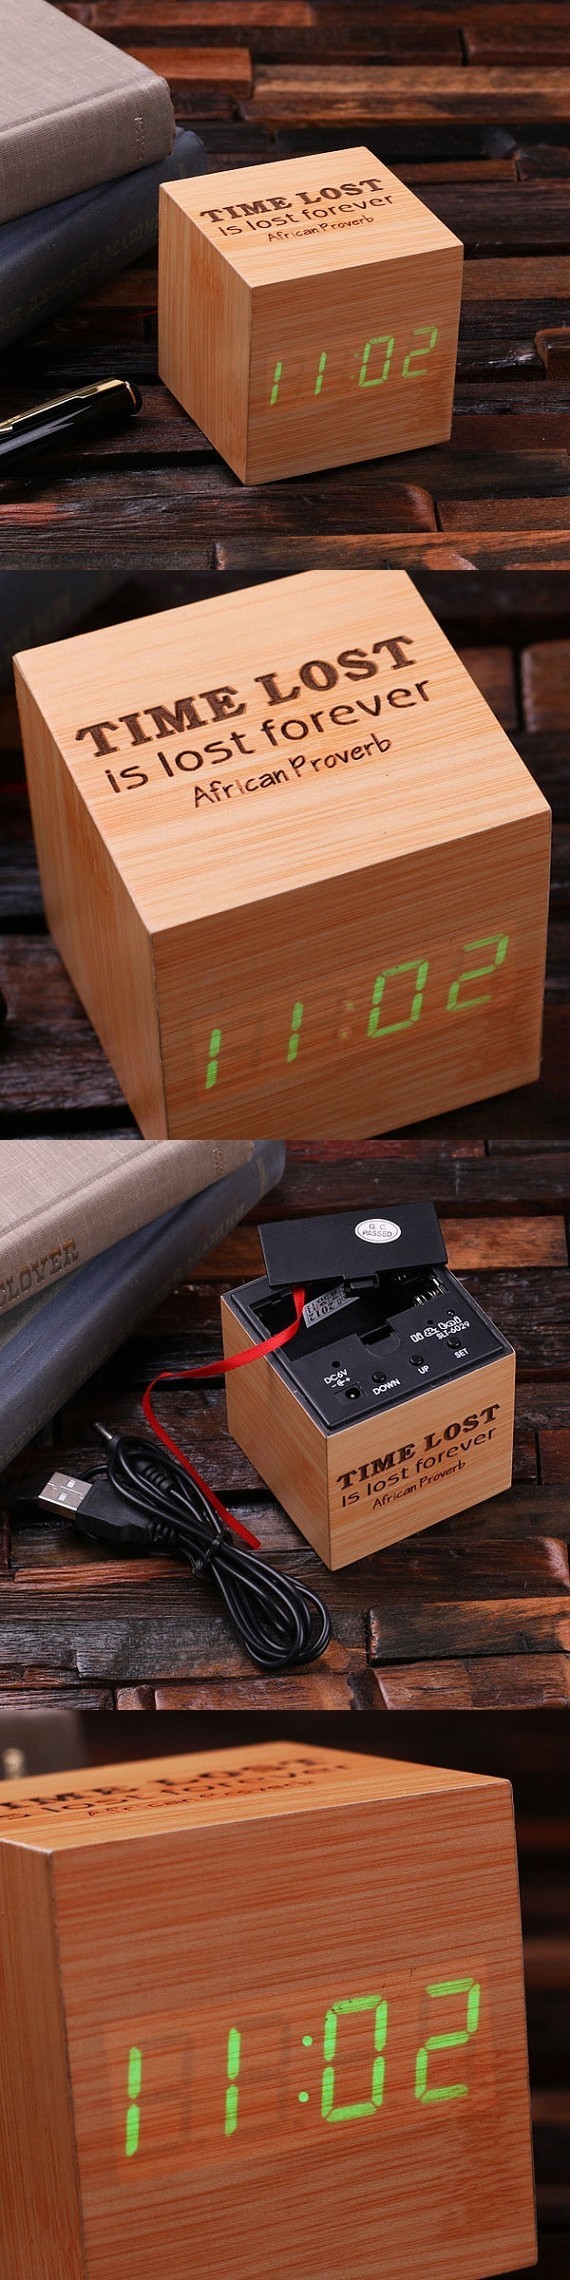 Personalized Cube-Shaped Digital Wood Clock with Engraved Message